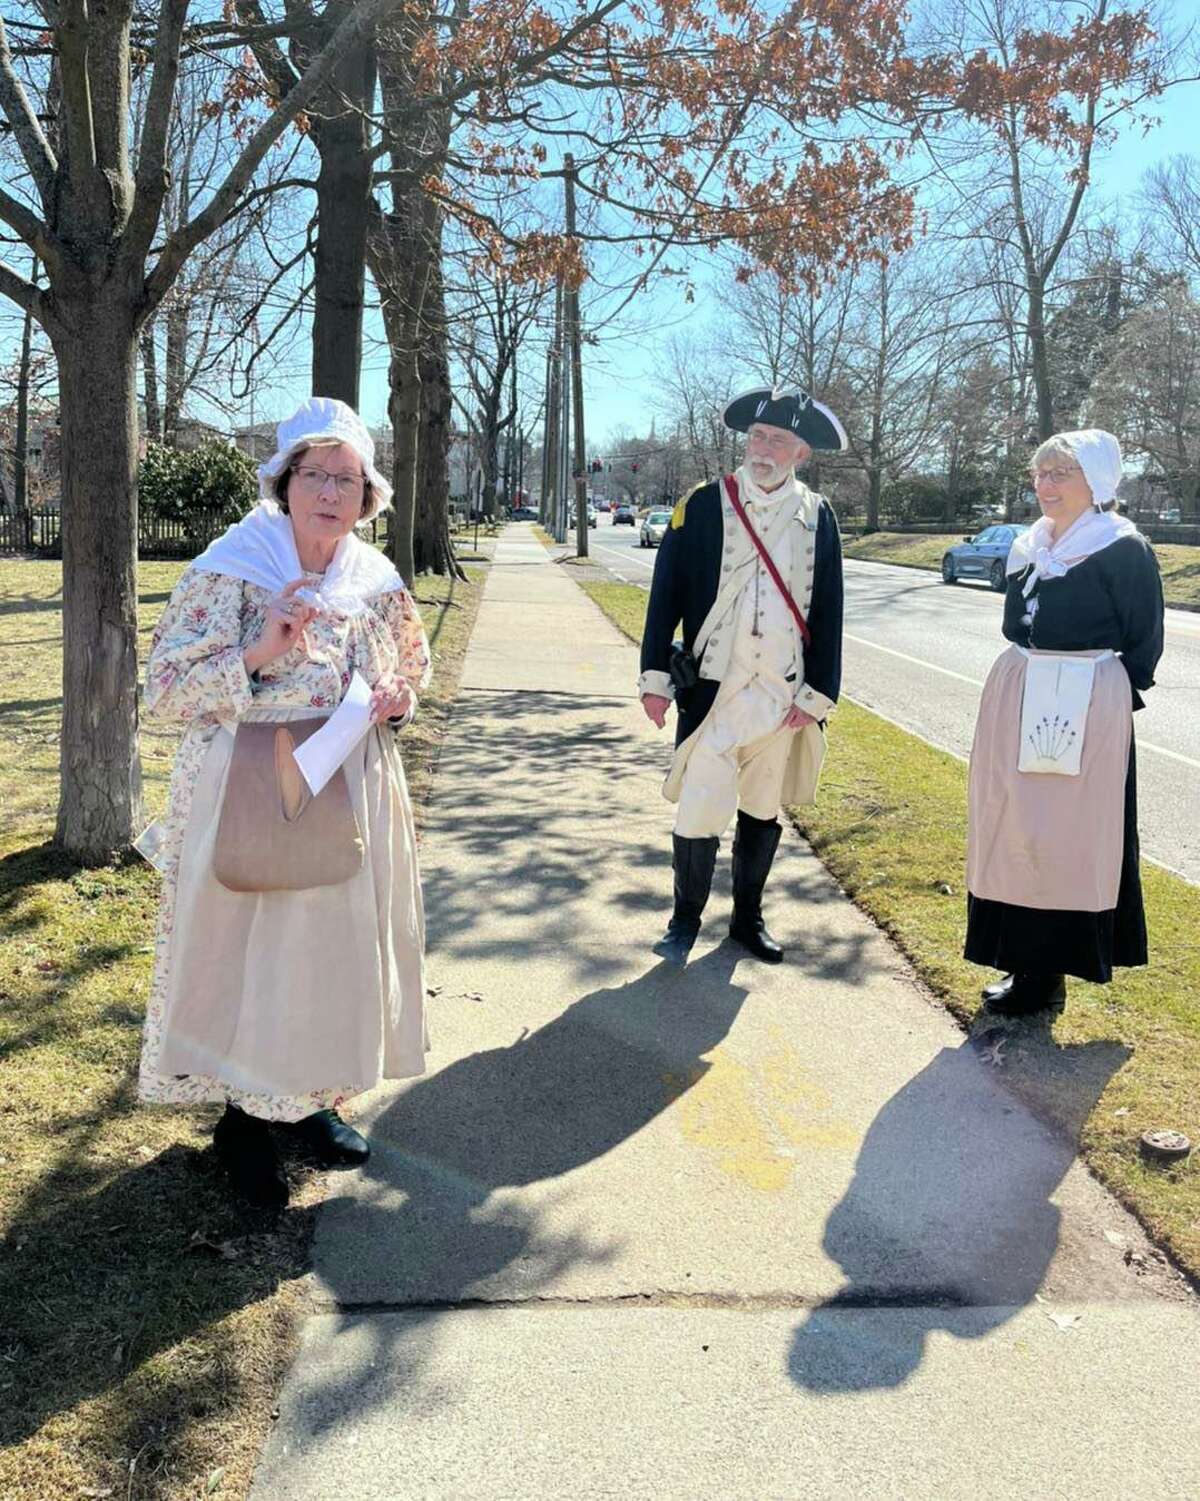 Members from Jesse Lee Memorial United Methodist Church are rehearsing for the Battle of Ridgefield reenactment, part of the town's weekend-long commemoration of the 245th anniversary. Pictured, B.G. Brown, left, portrays Mary Smith, the tavern keeper’s wife.